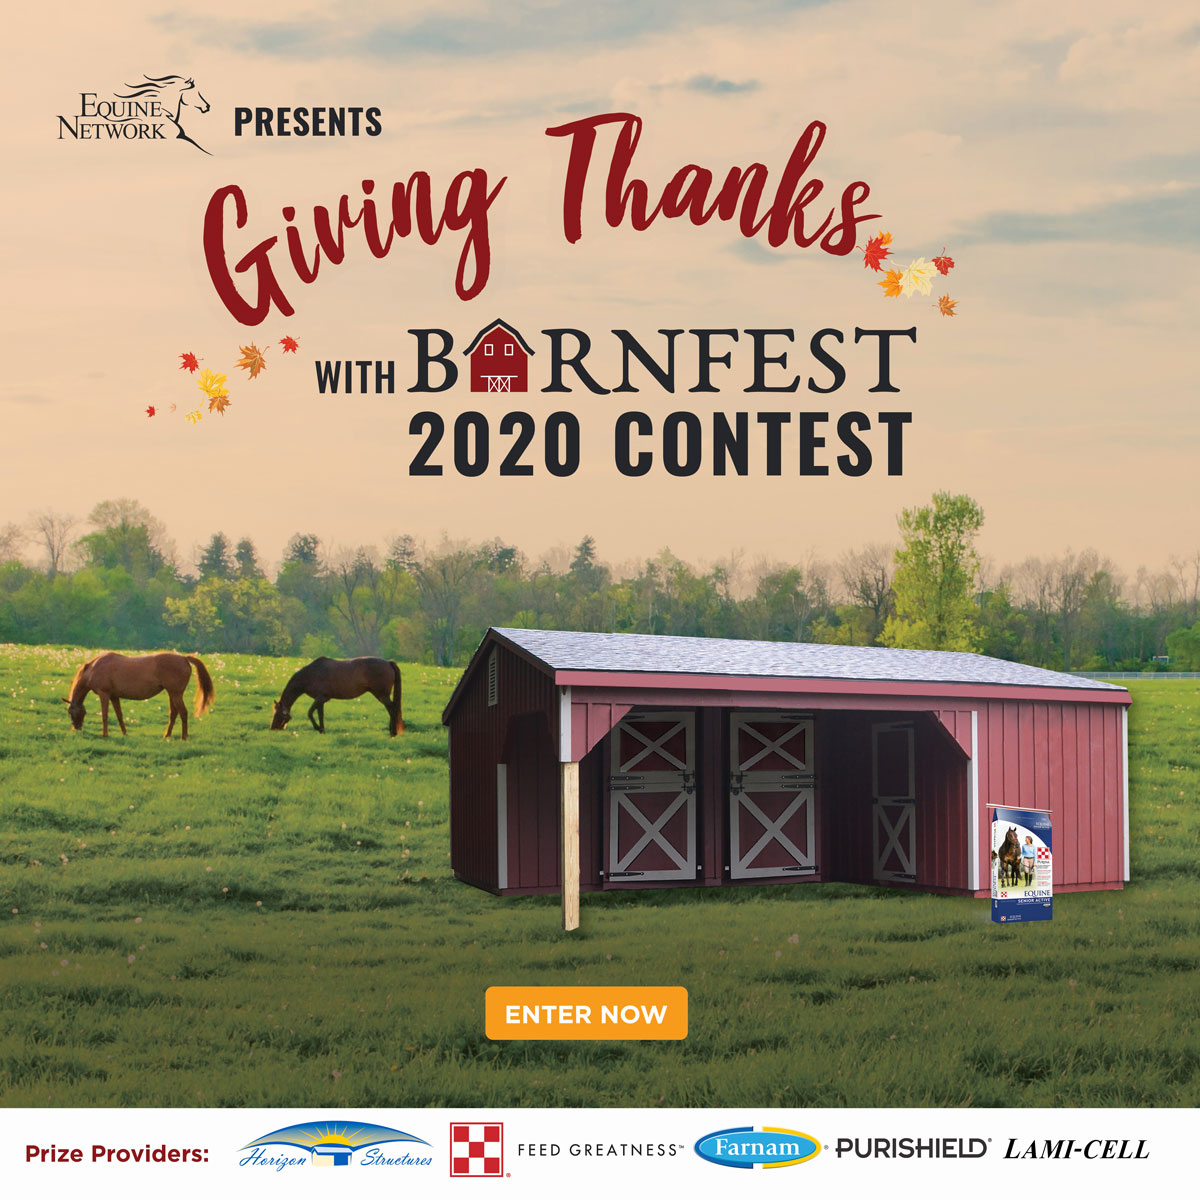 Horizon Structures LLC and Purina Animal Nutrition LLC To Offer $18,200 Prize Package To Deserving Horse Rescue